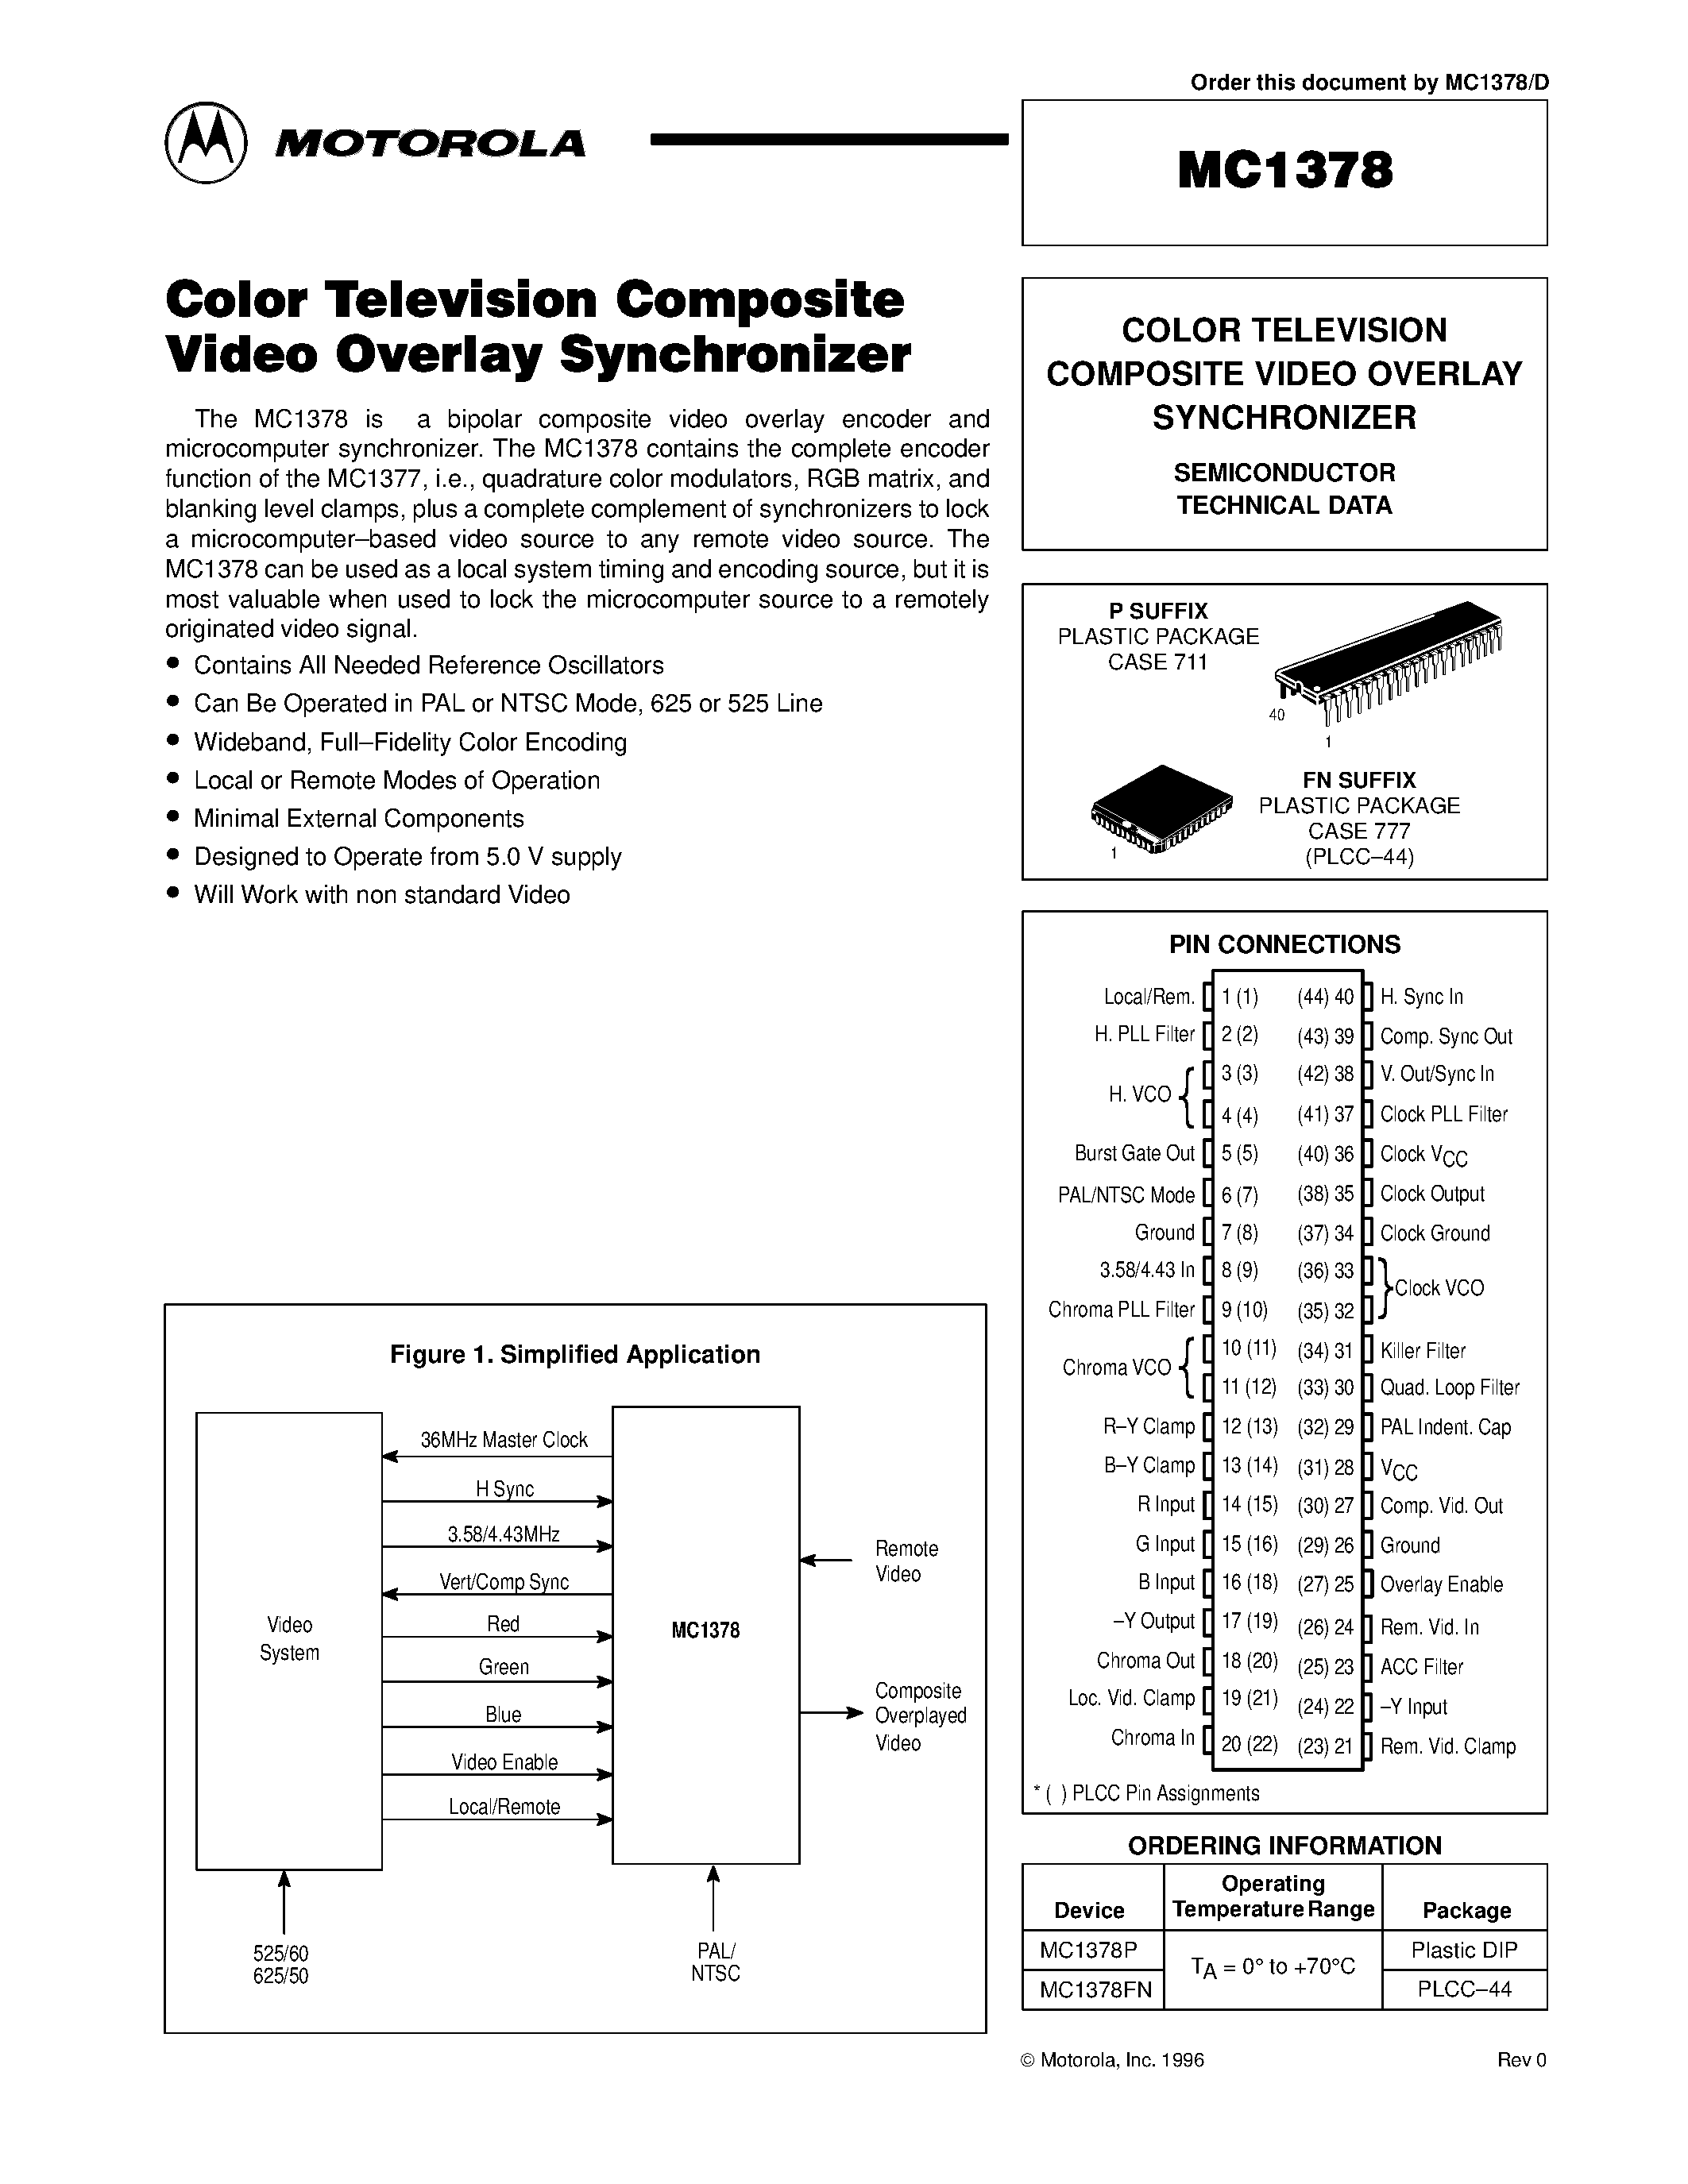 Datasheet MC1378FN - COLOR TELEVISION COMPOSITE VIDEO OVERLAY SYNCHRONIZER page 1